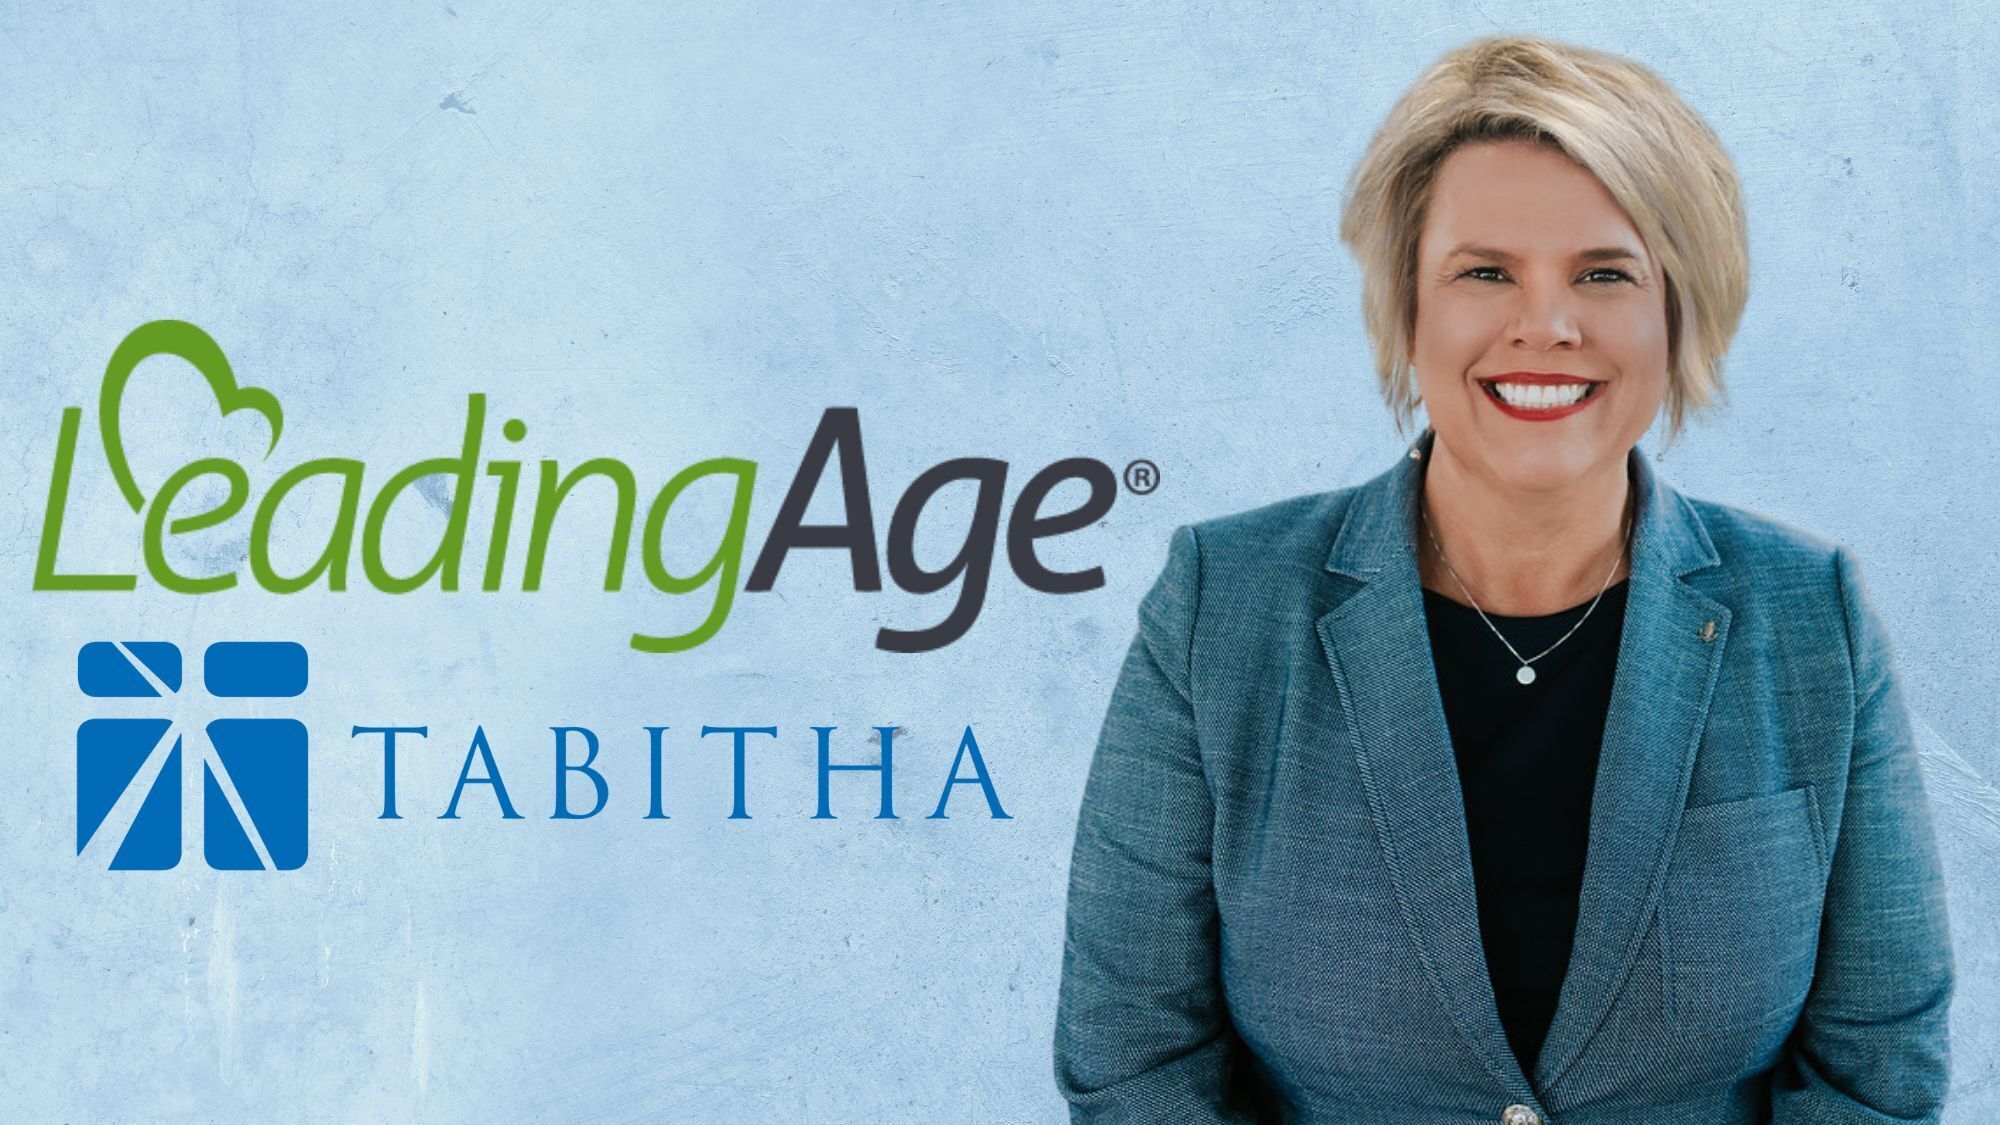 Christie Hinrichs Partners with LeadingAge to Strengthen the Future of Aging Care